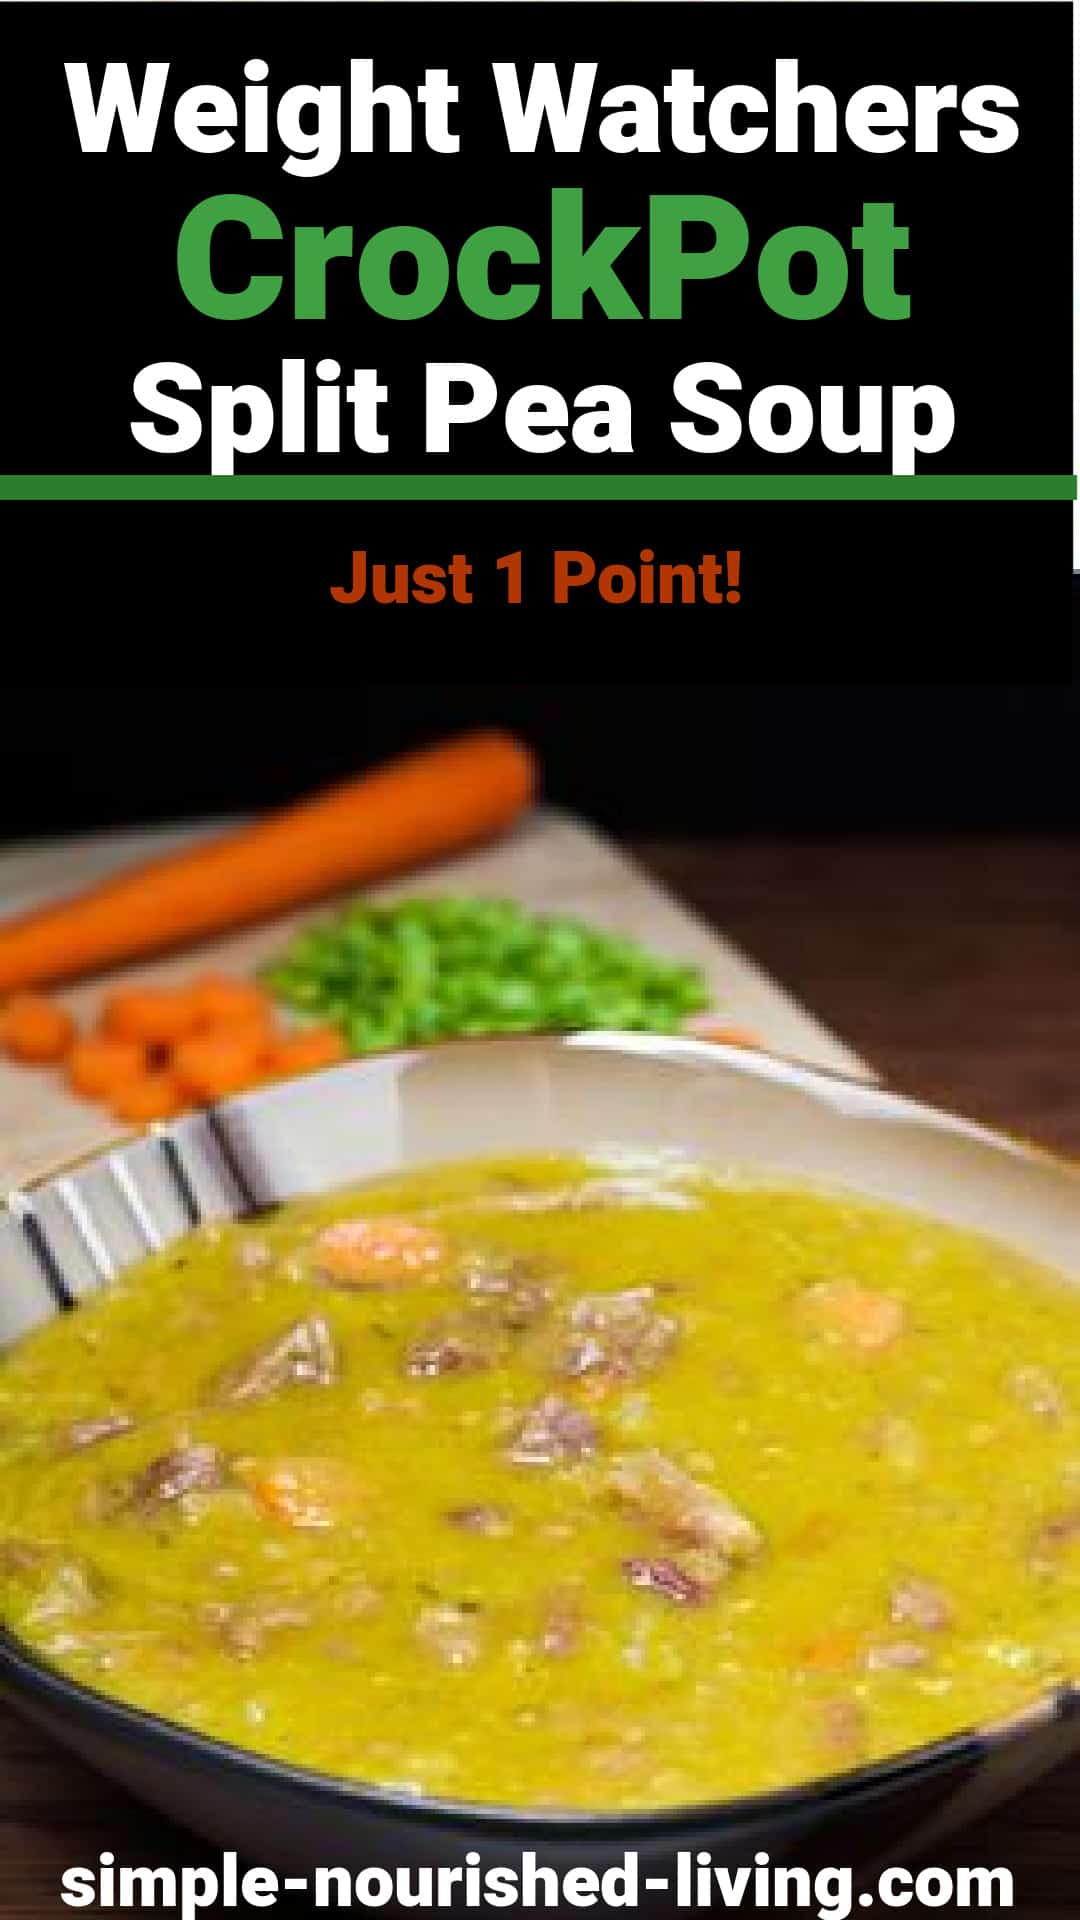 bowl of split pea soup with carrot and chopped celery in the background. Text Box: Weight Watchers CrockPot Split Pea Soup. Just 1 Point.